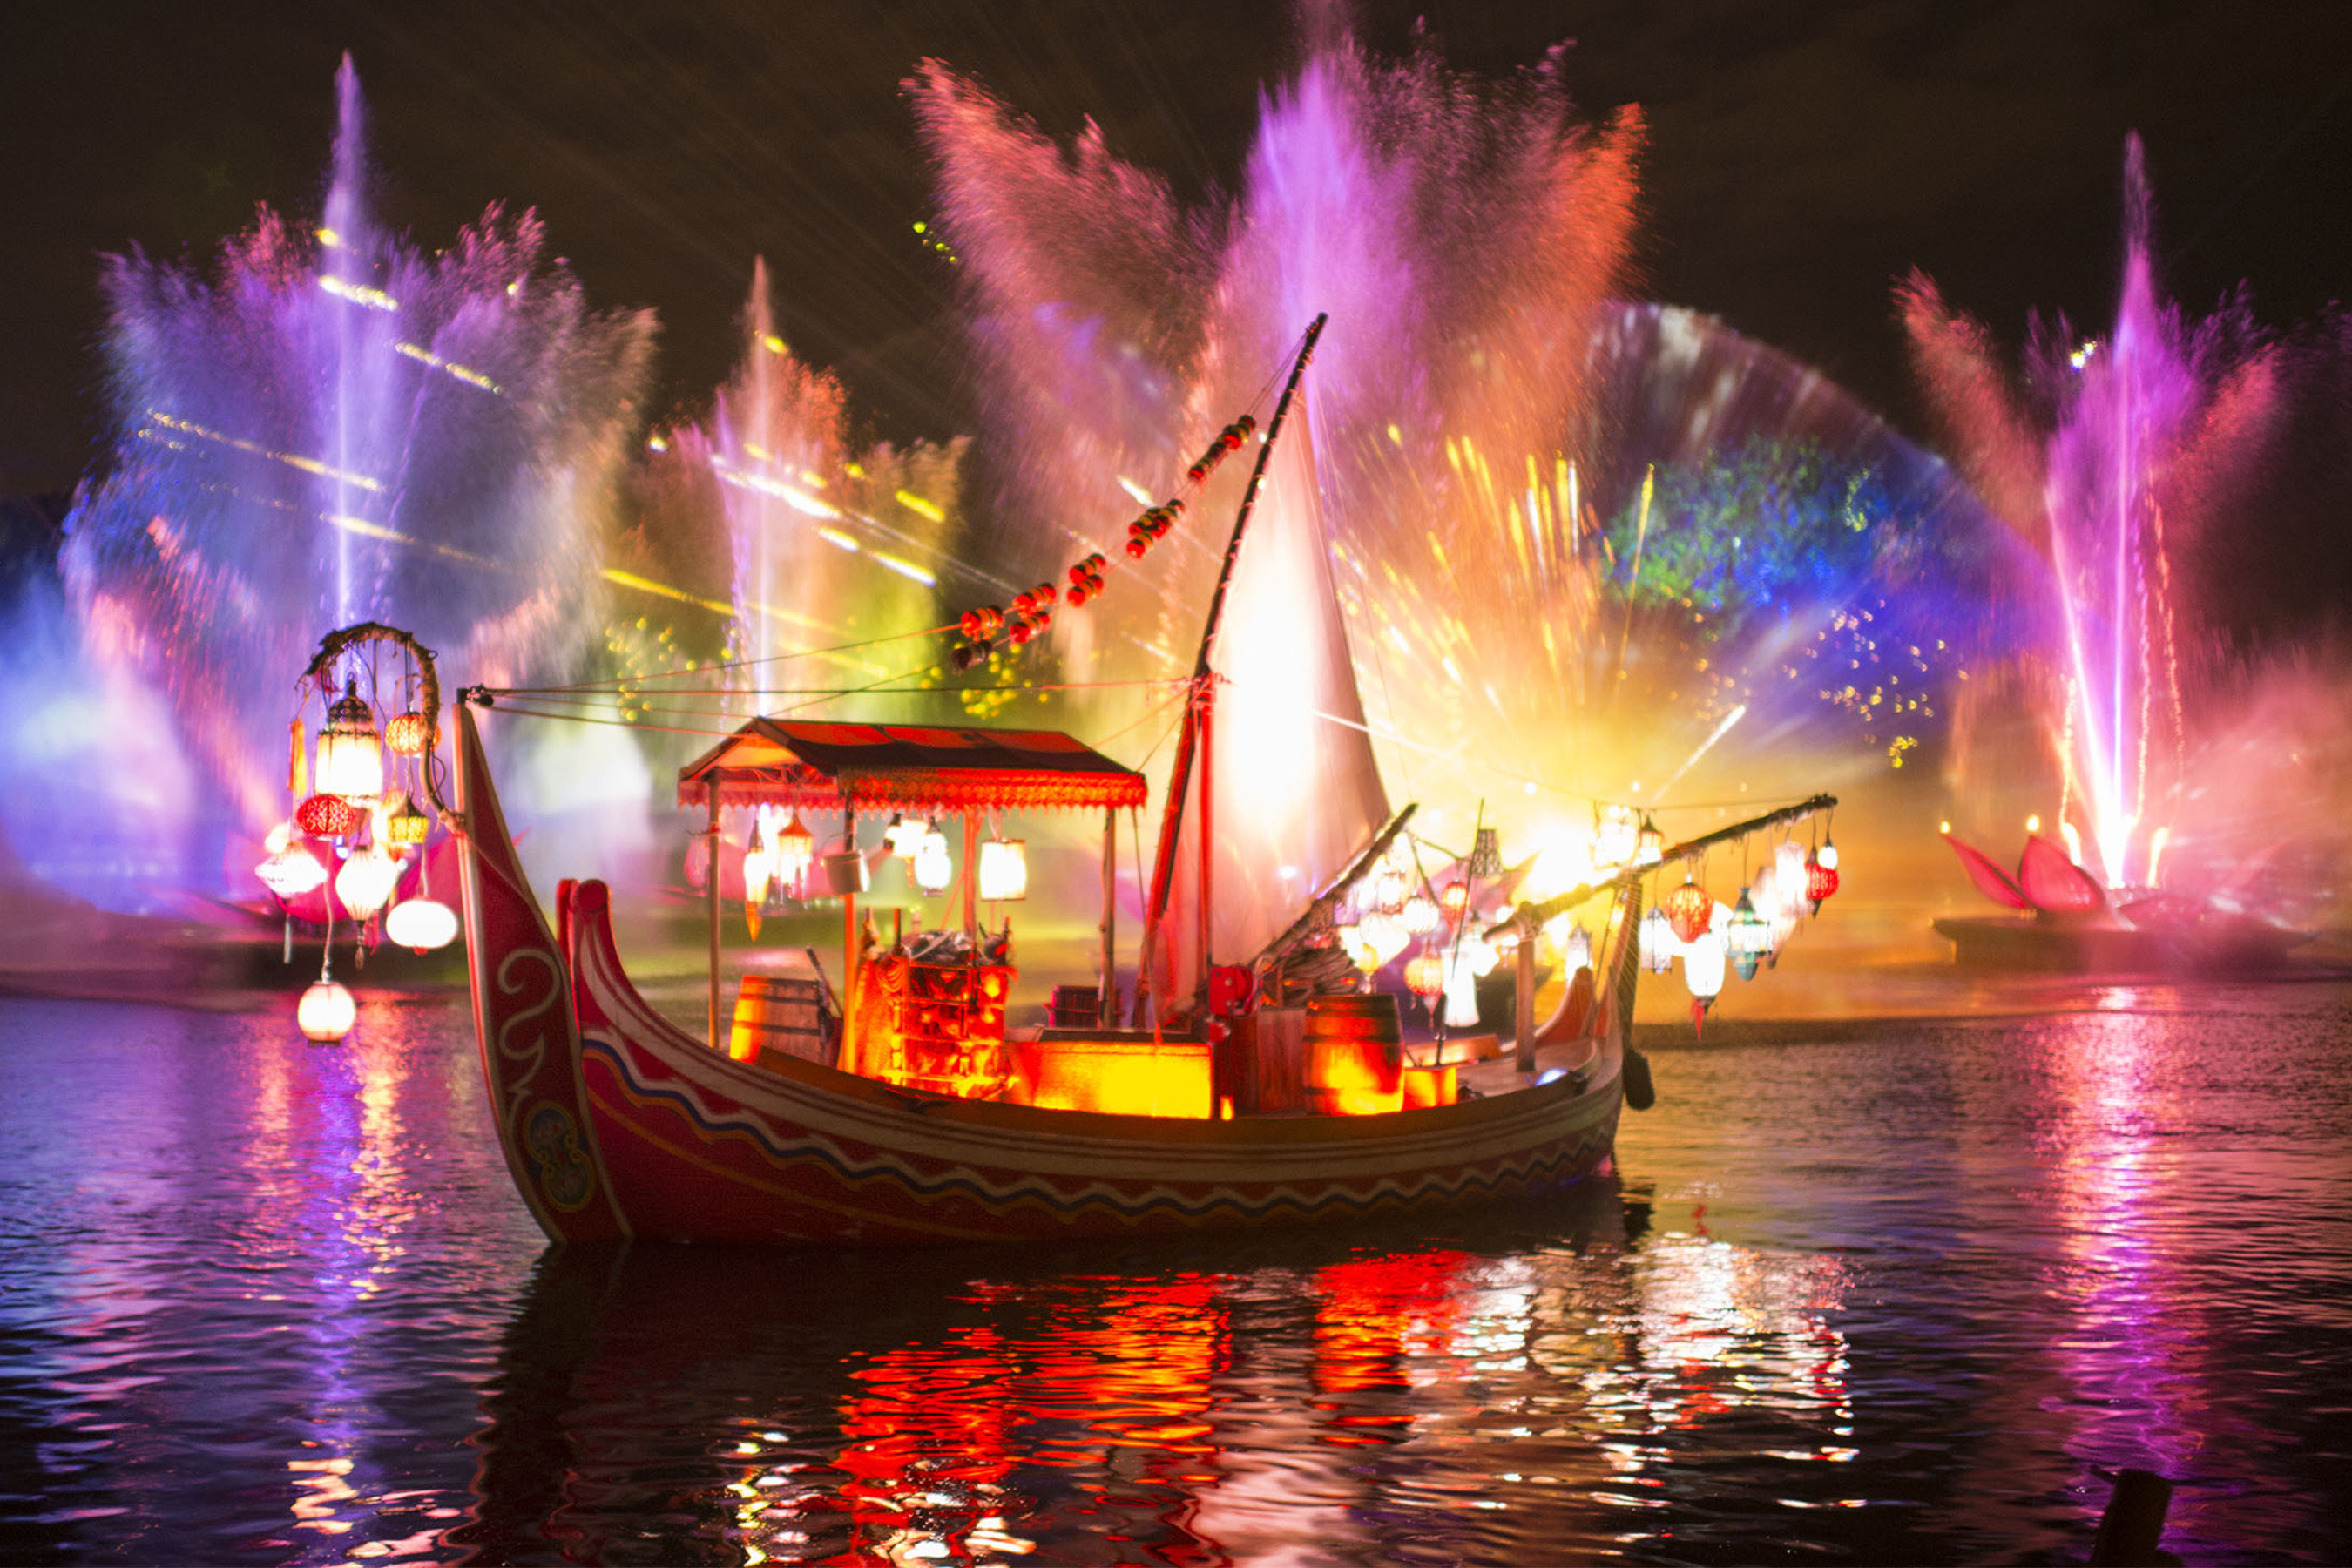 VIDEO First look at Rivers of Light at Disney's Animal Kingdom